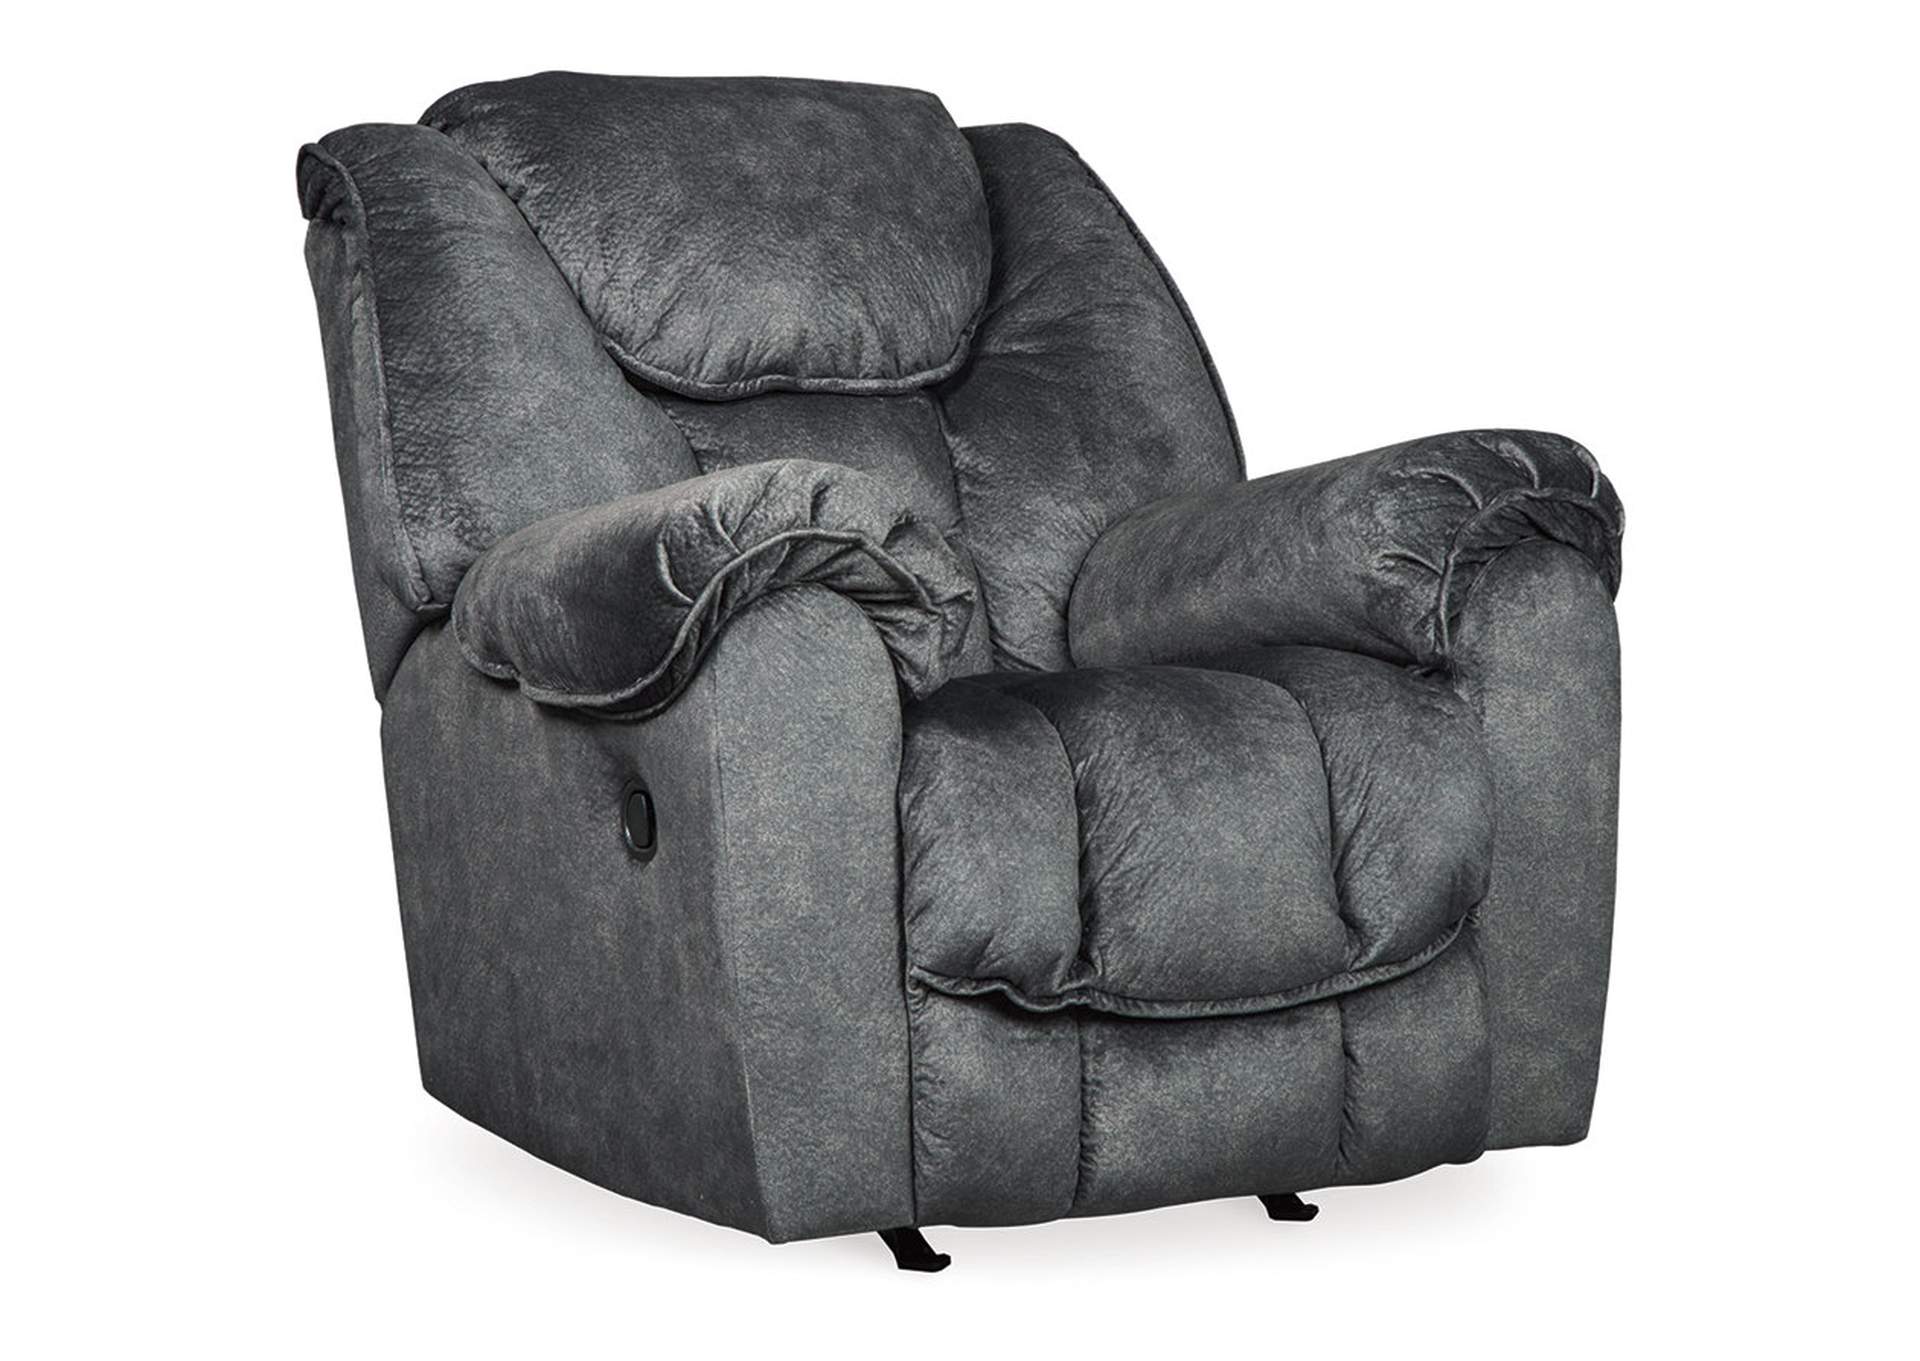 Capehorn Reclining Loveseat and 2 Recliners,Signature Design By Ashley